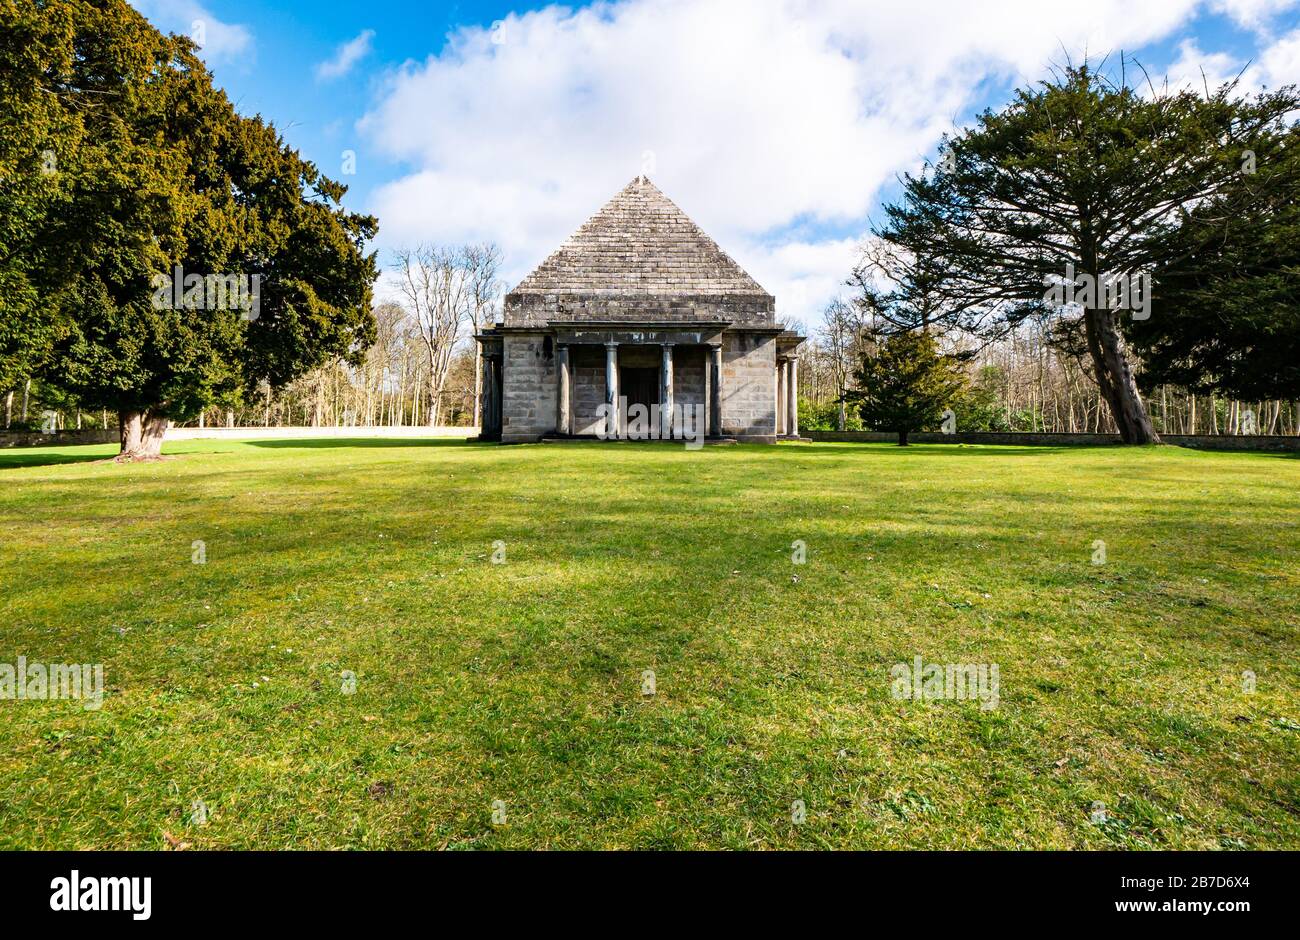 Gosford Estate, East Lothian, Scotland, United Kingdom. 15th March, 2020. UK Weather: Spring sunshine at the country estate. Neo-Classical pyramid burial vault mausoleum built by 7th Earl of Wemyss, Francis Charteris with yew trees Stock Photo